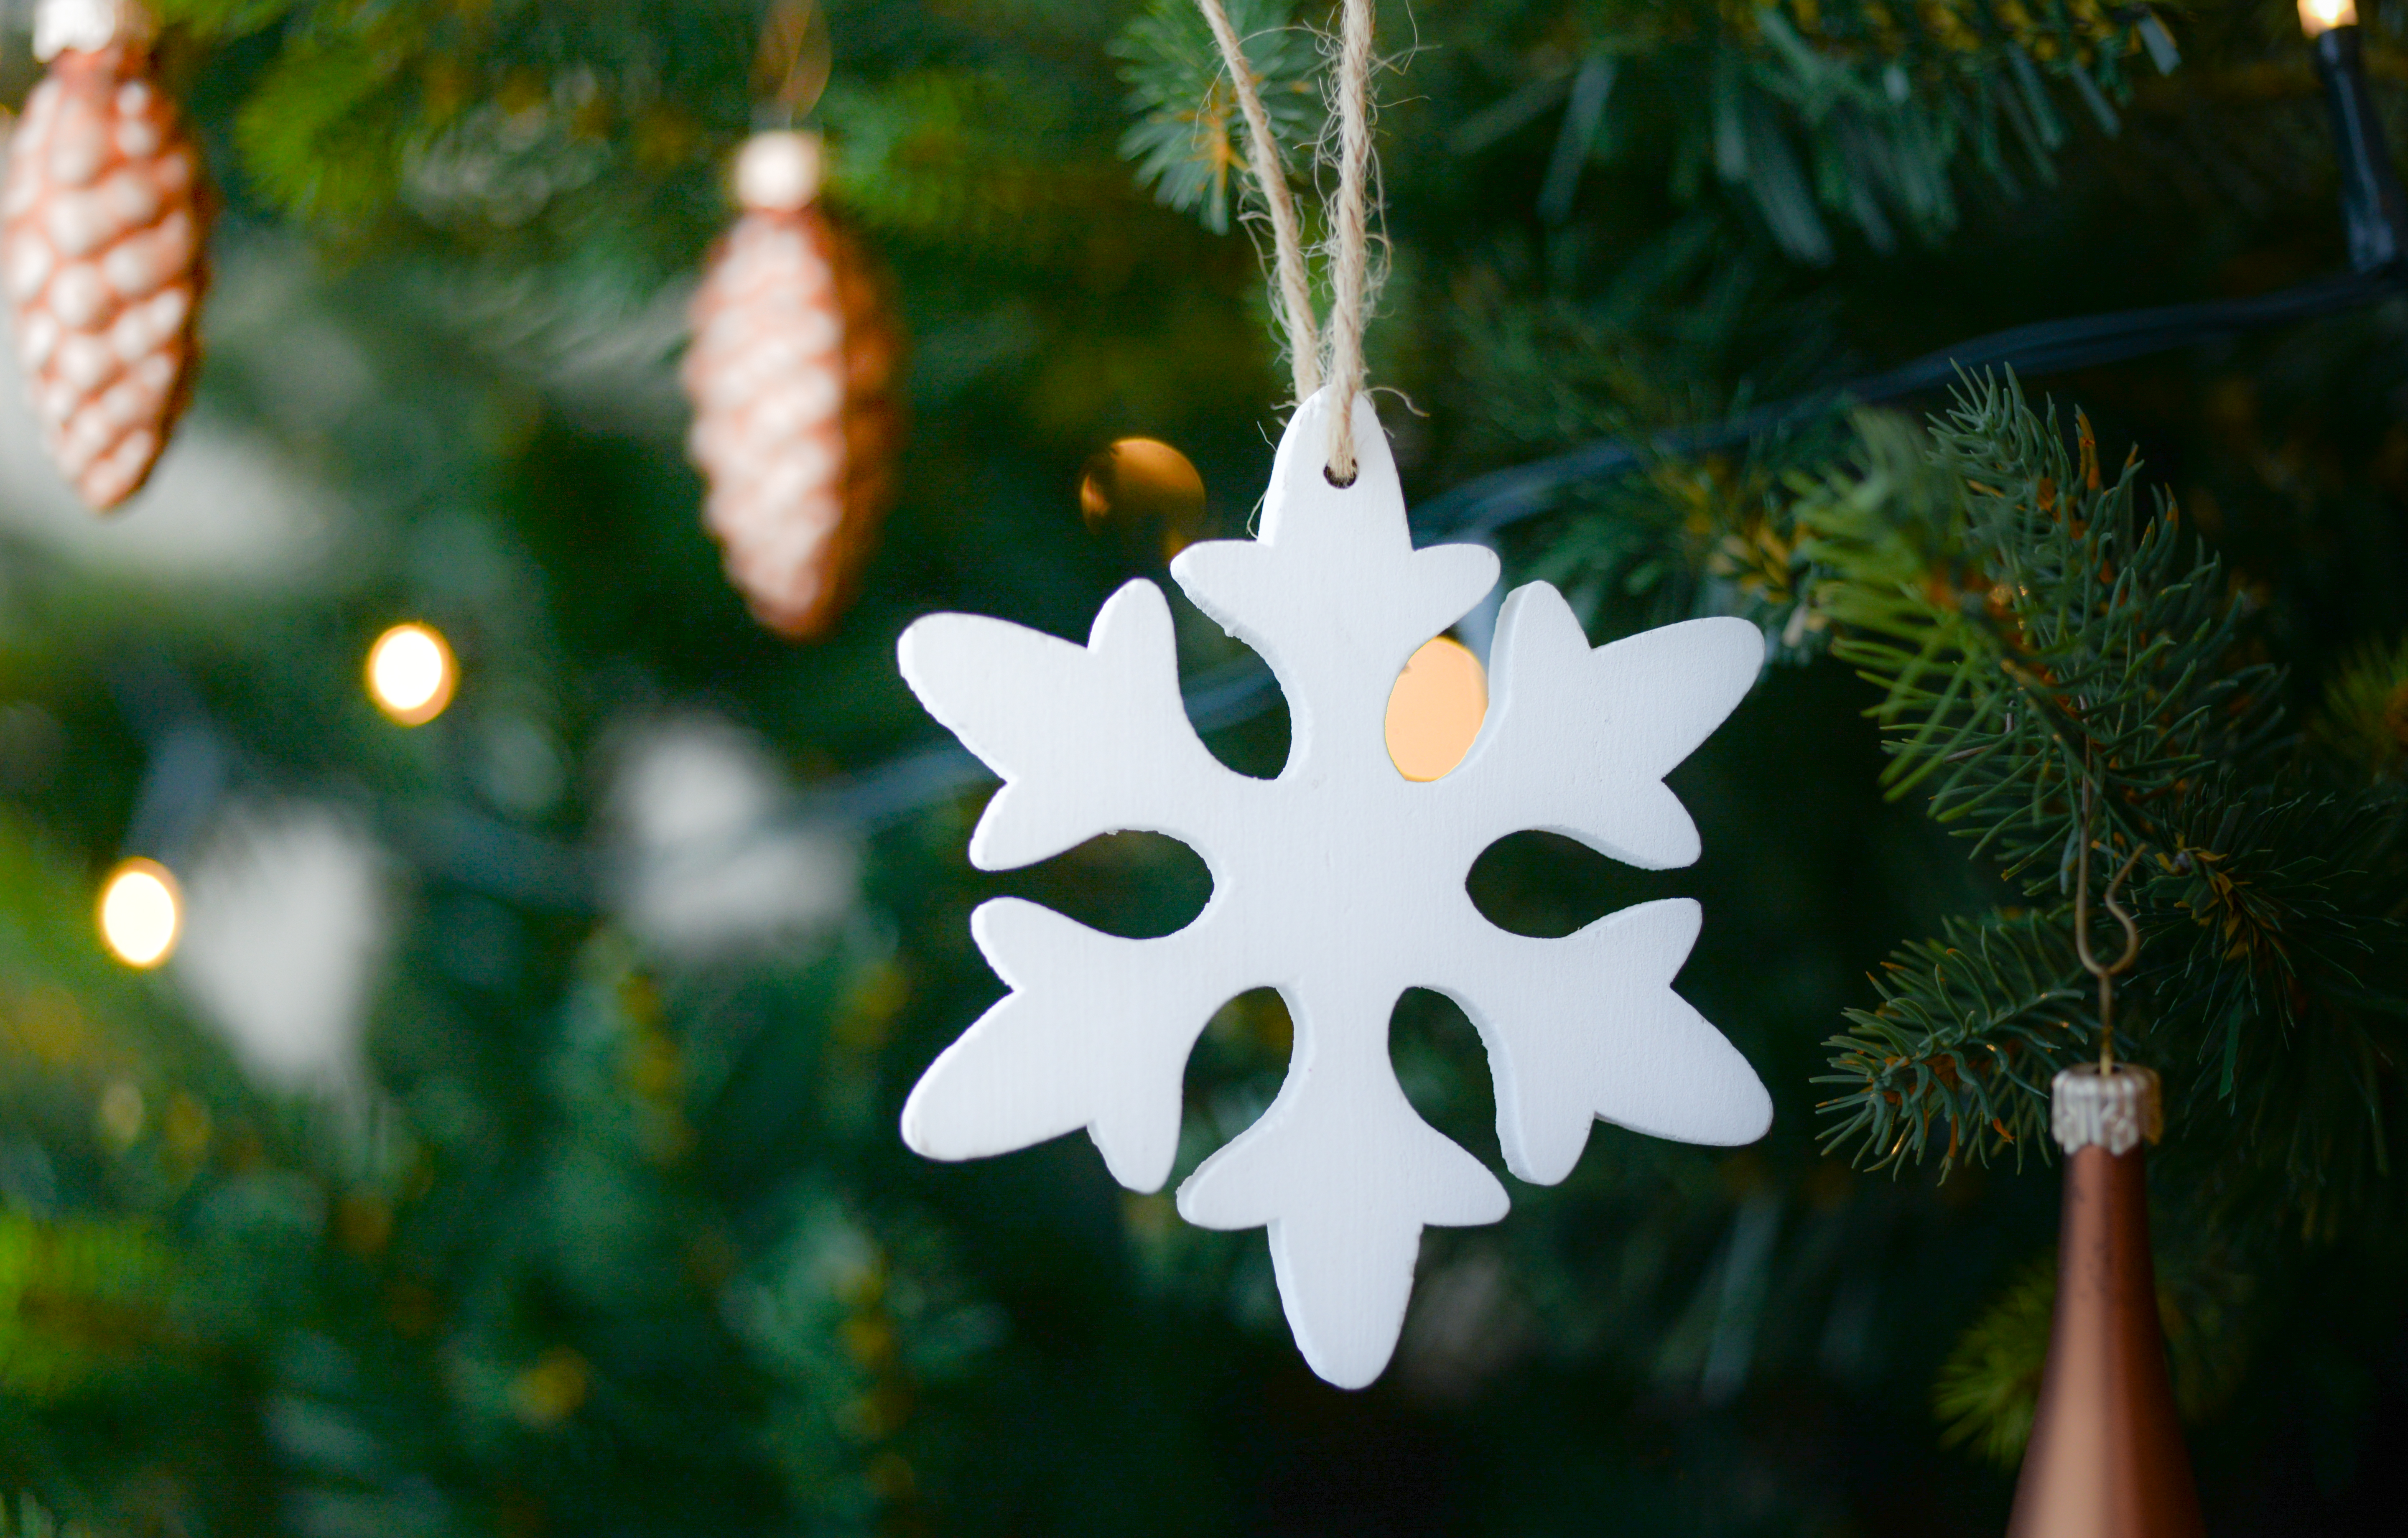 Cool Backgrounds decoration, holidays, snowflake Christmas Tree Toy